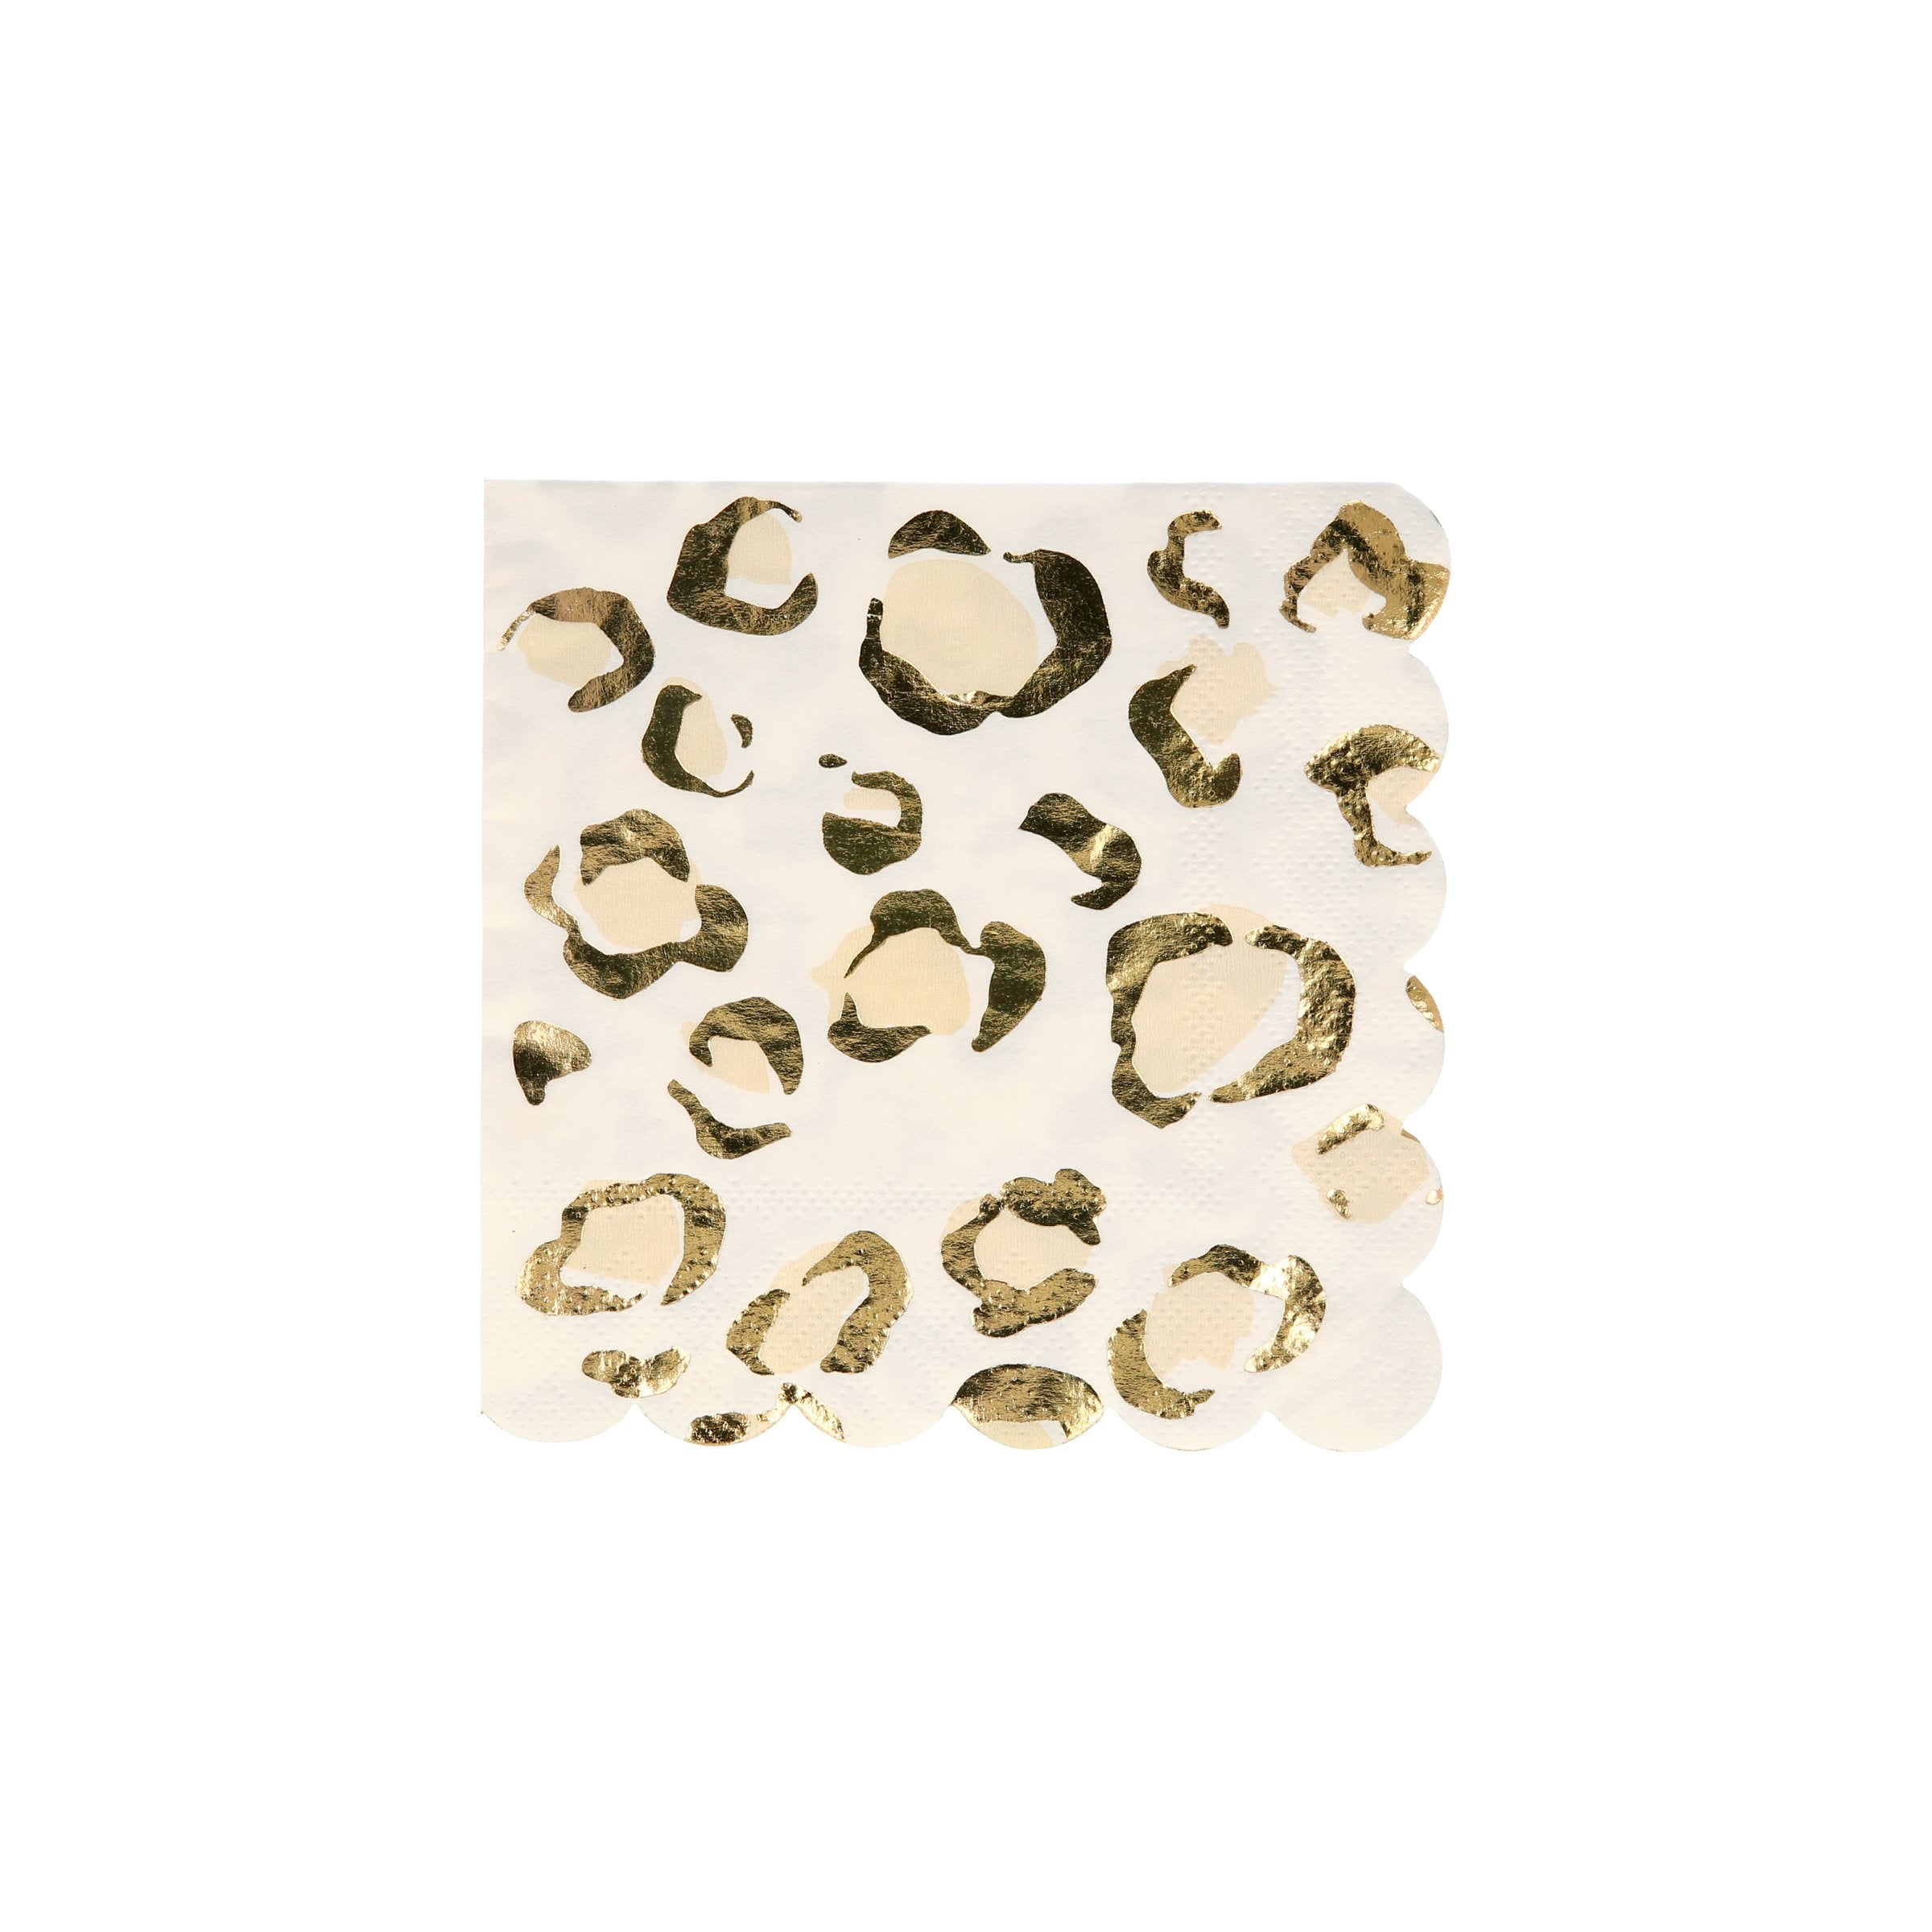 Our small paper napkins, with animal print designs, are ideal for a safari party.